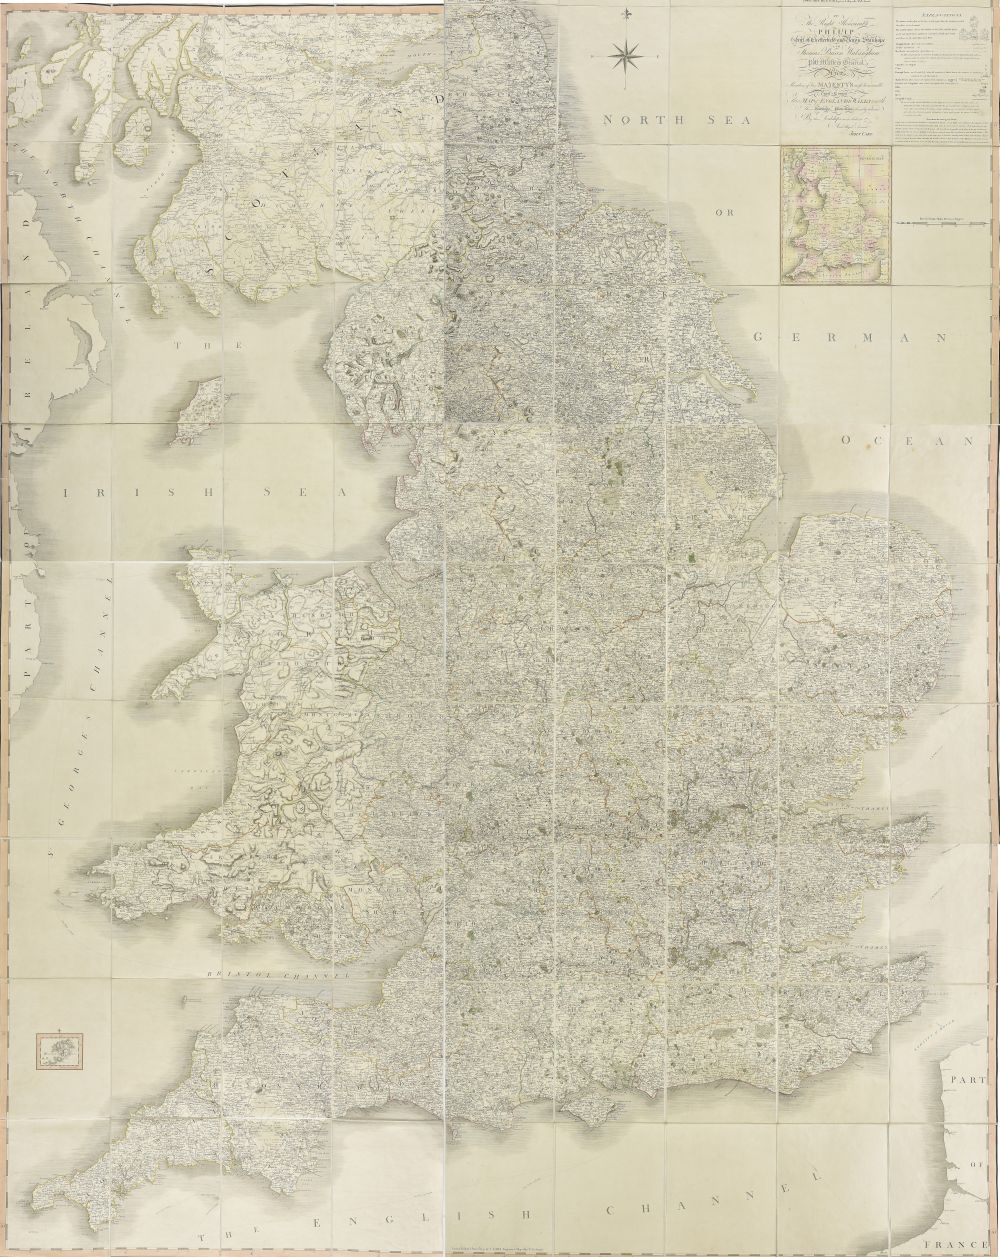 England & Wales. Cary (John), Cary's New Map of England and Wales, 1794